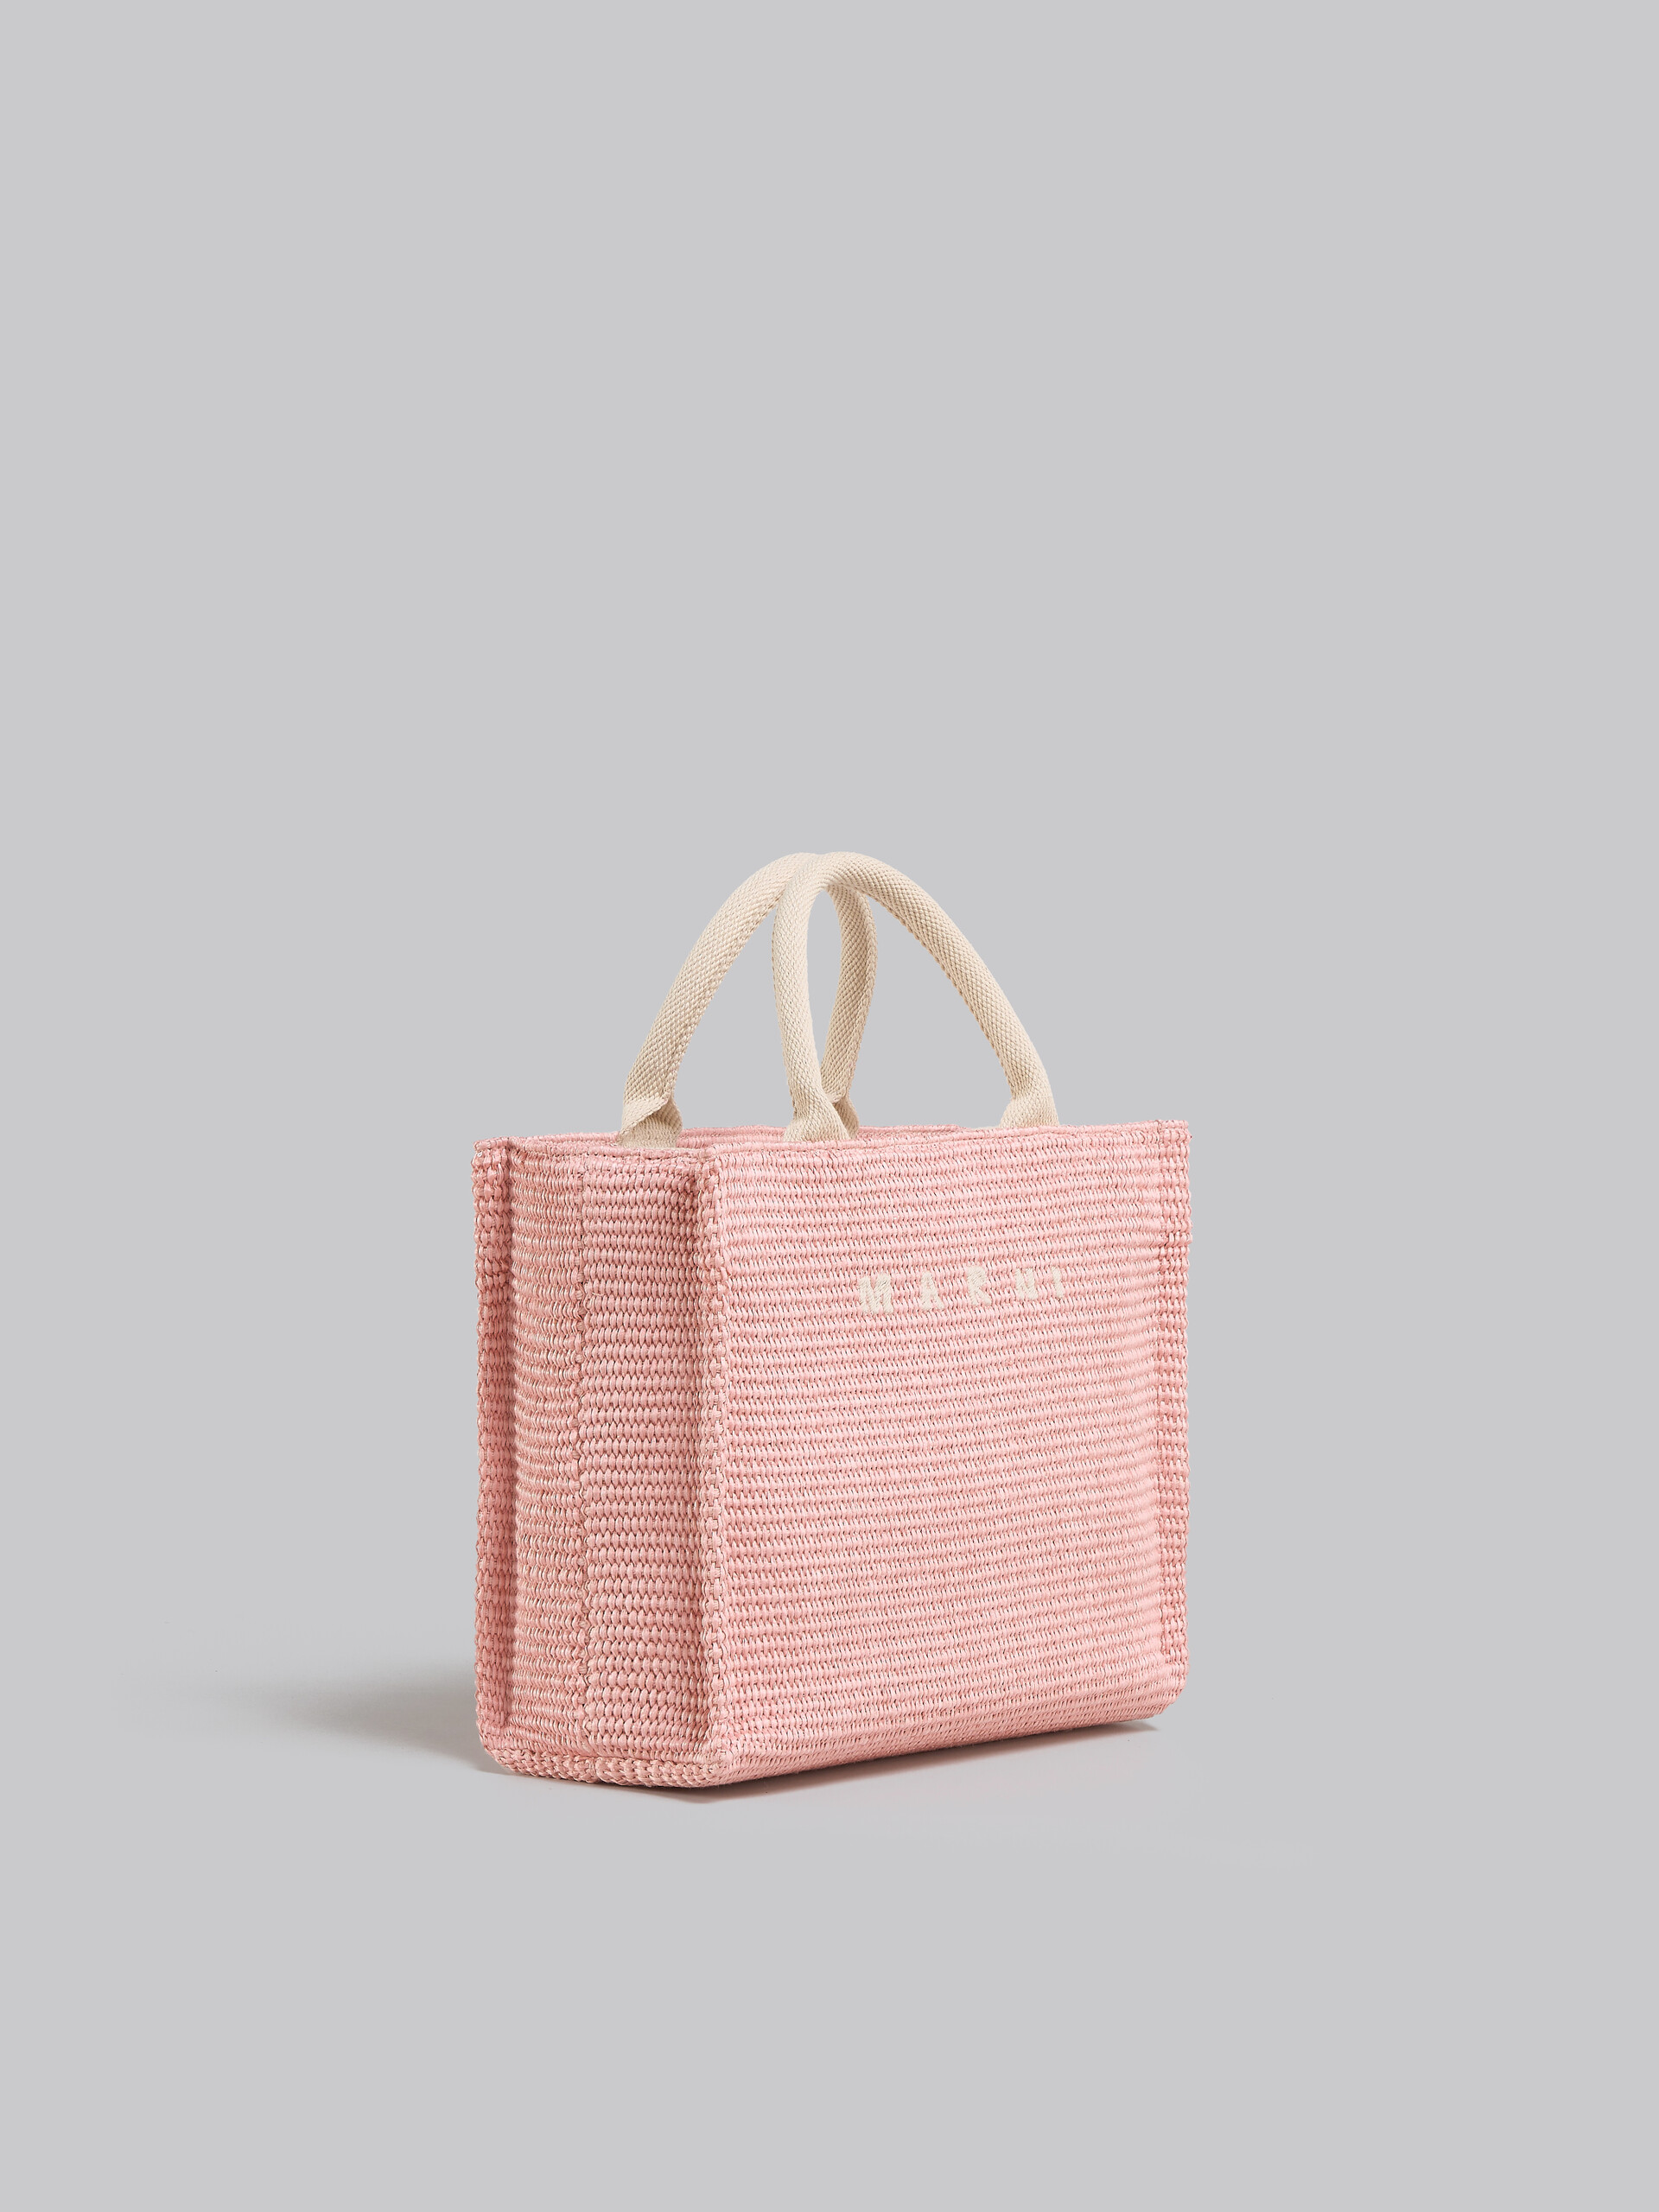 Small Tote in lilac raffia-effect fabric - Shopping Bags - Image 6